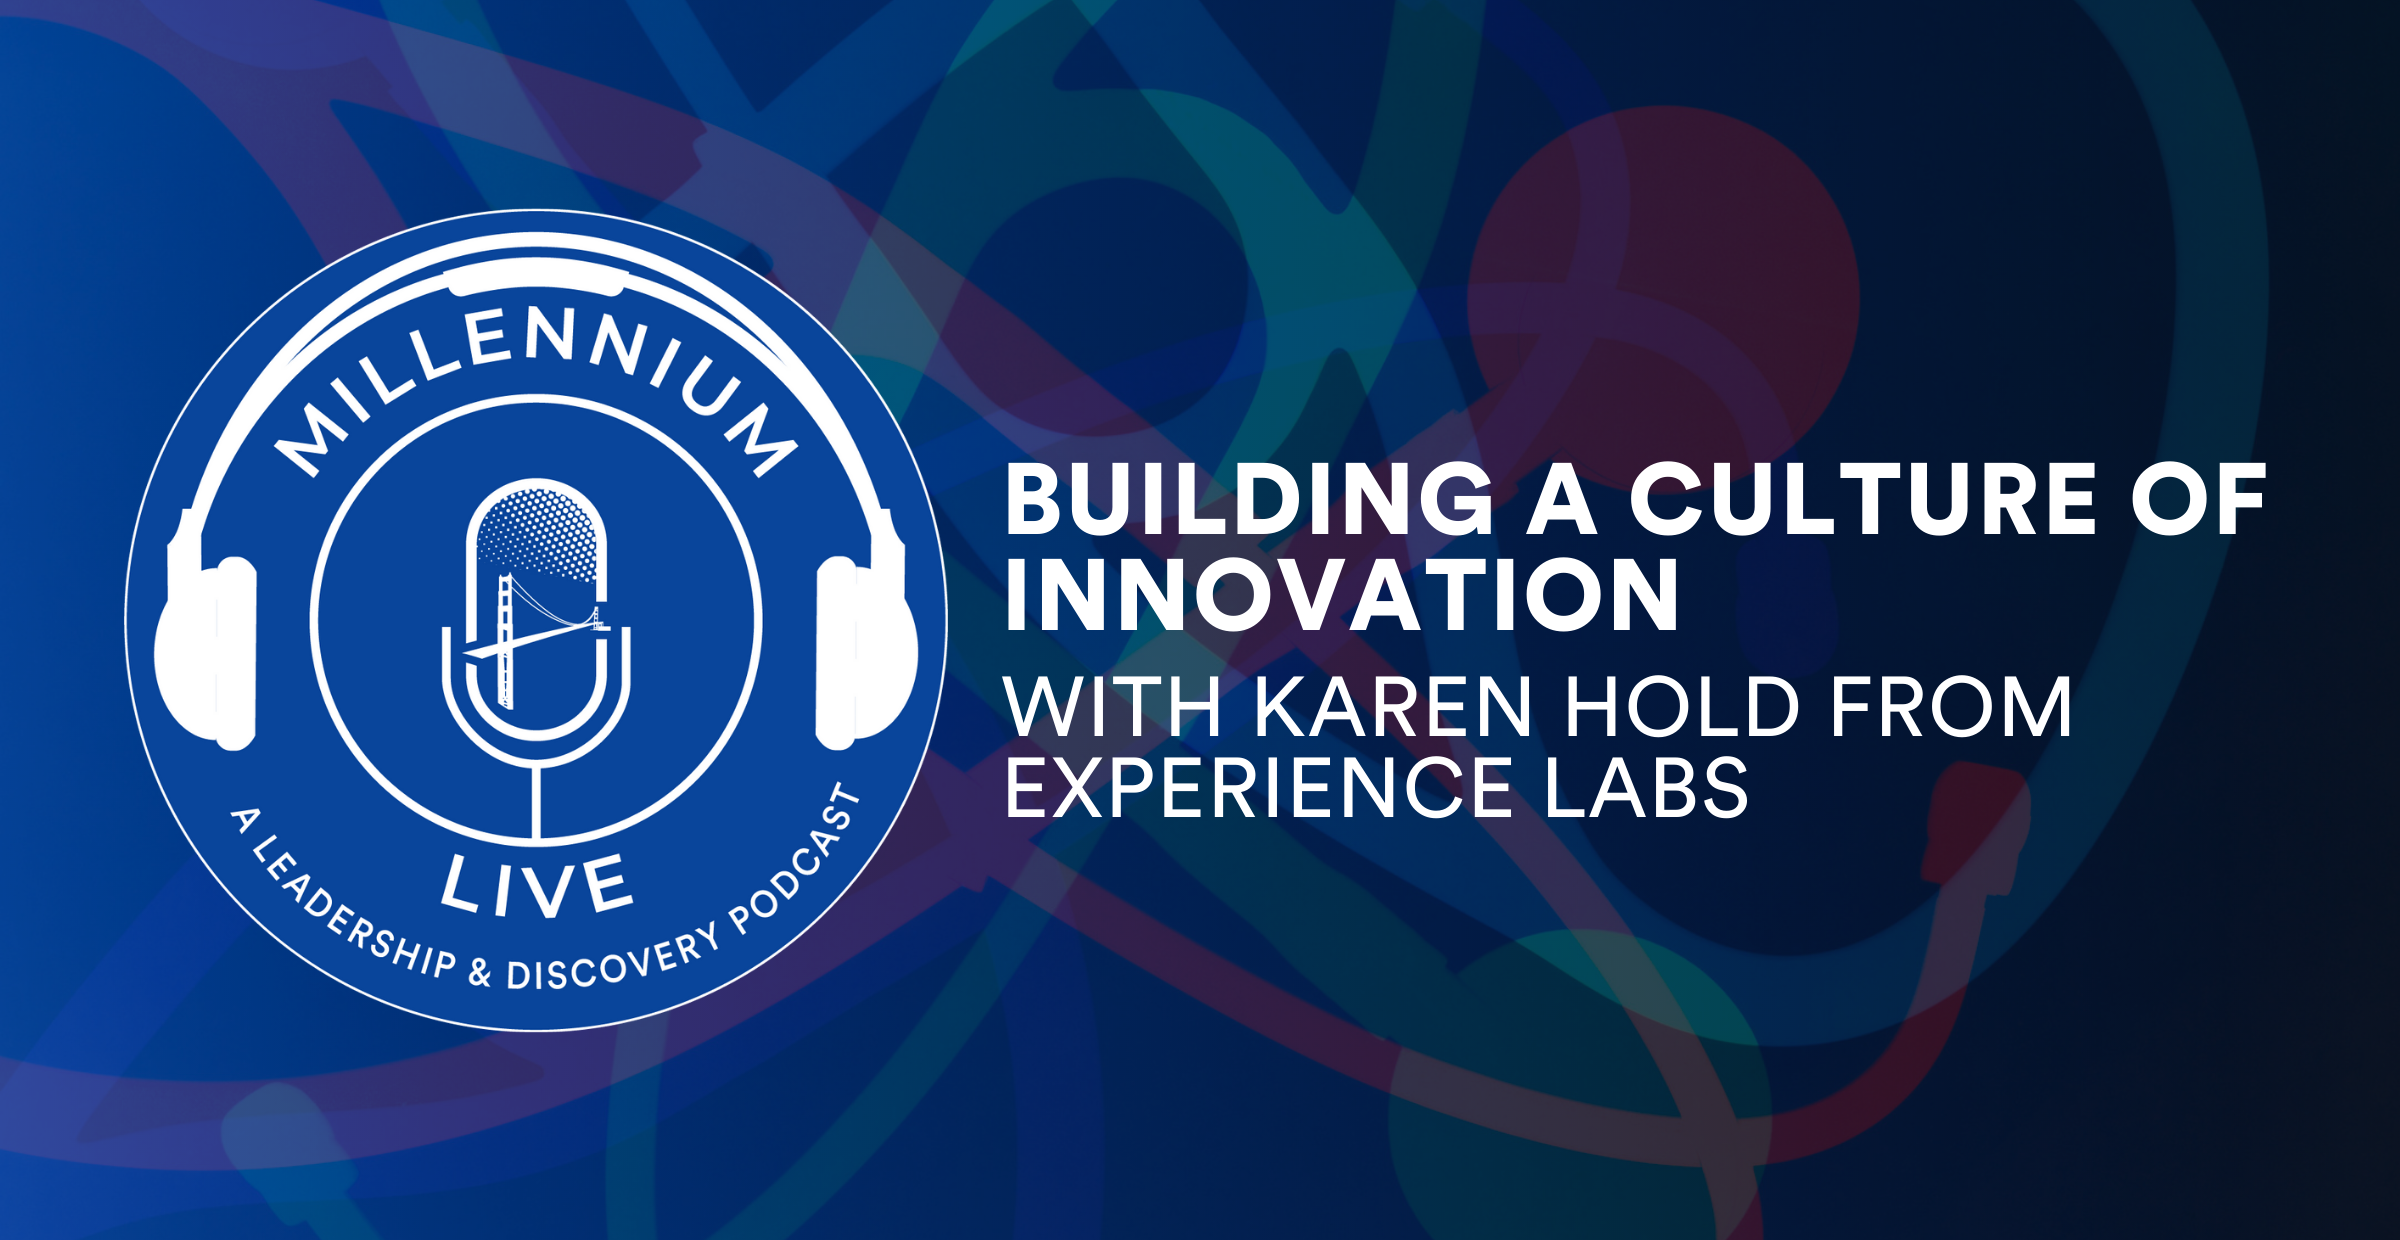 #MillenniumLive on Building a Culture of Innovation with Karen Hold